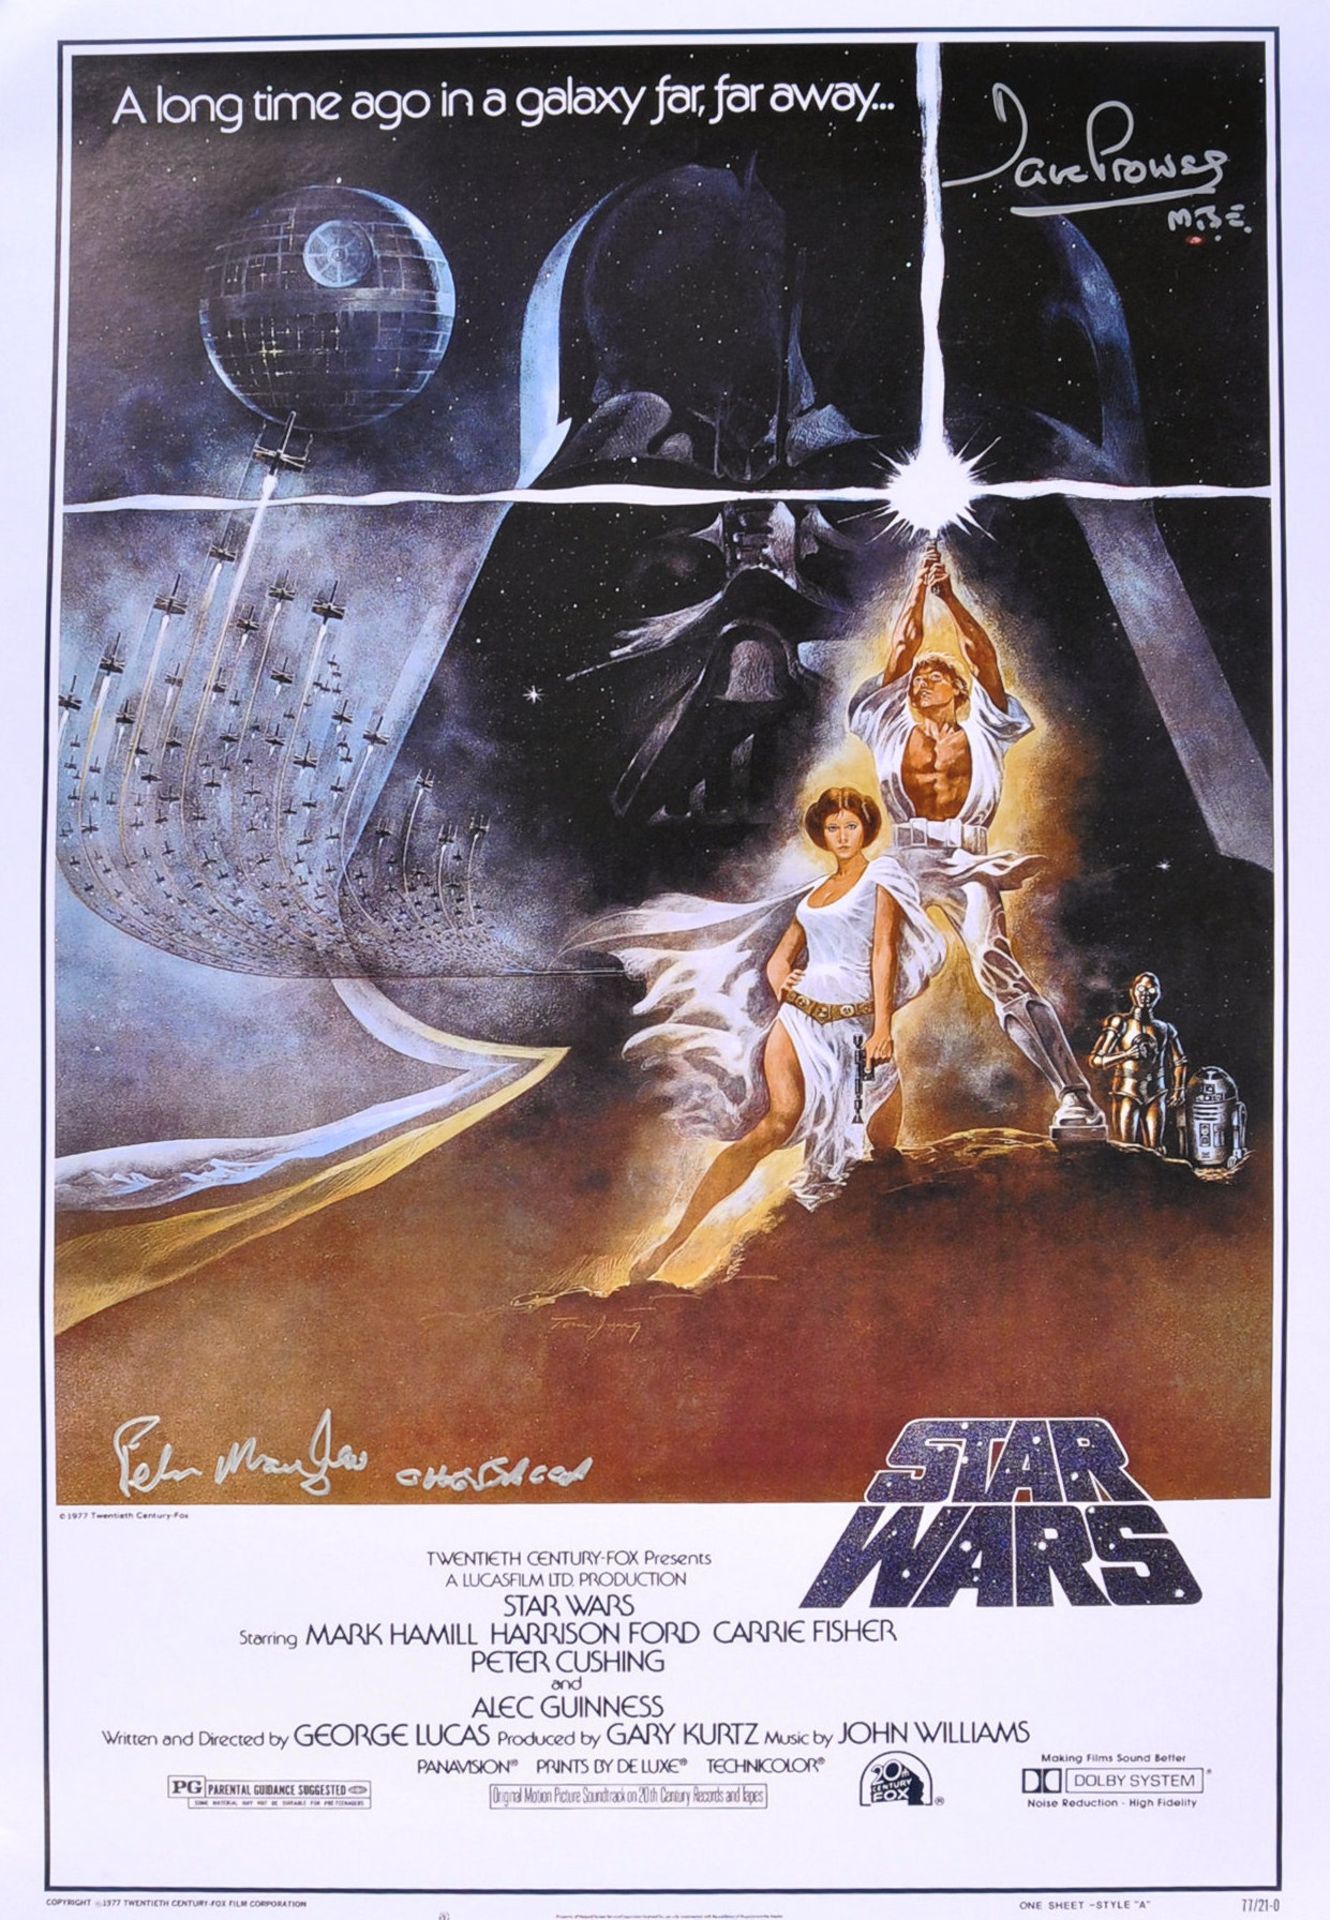 STAR WARS - PETER MAYHEW & DAVE PROWSE SIGNED POSTER